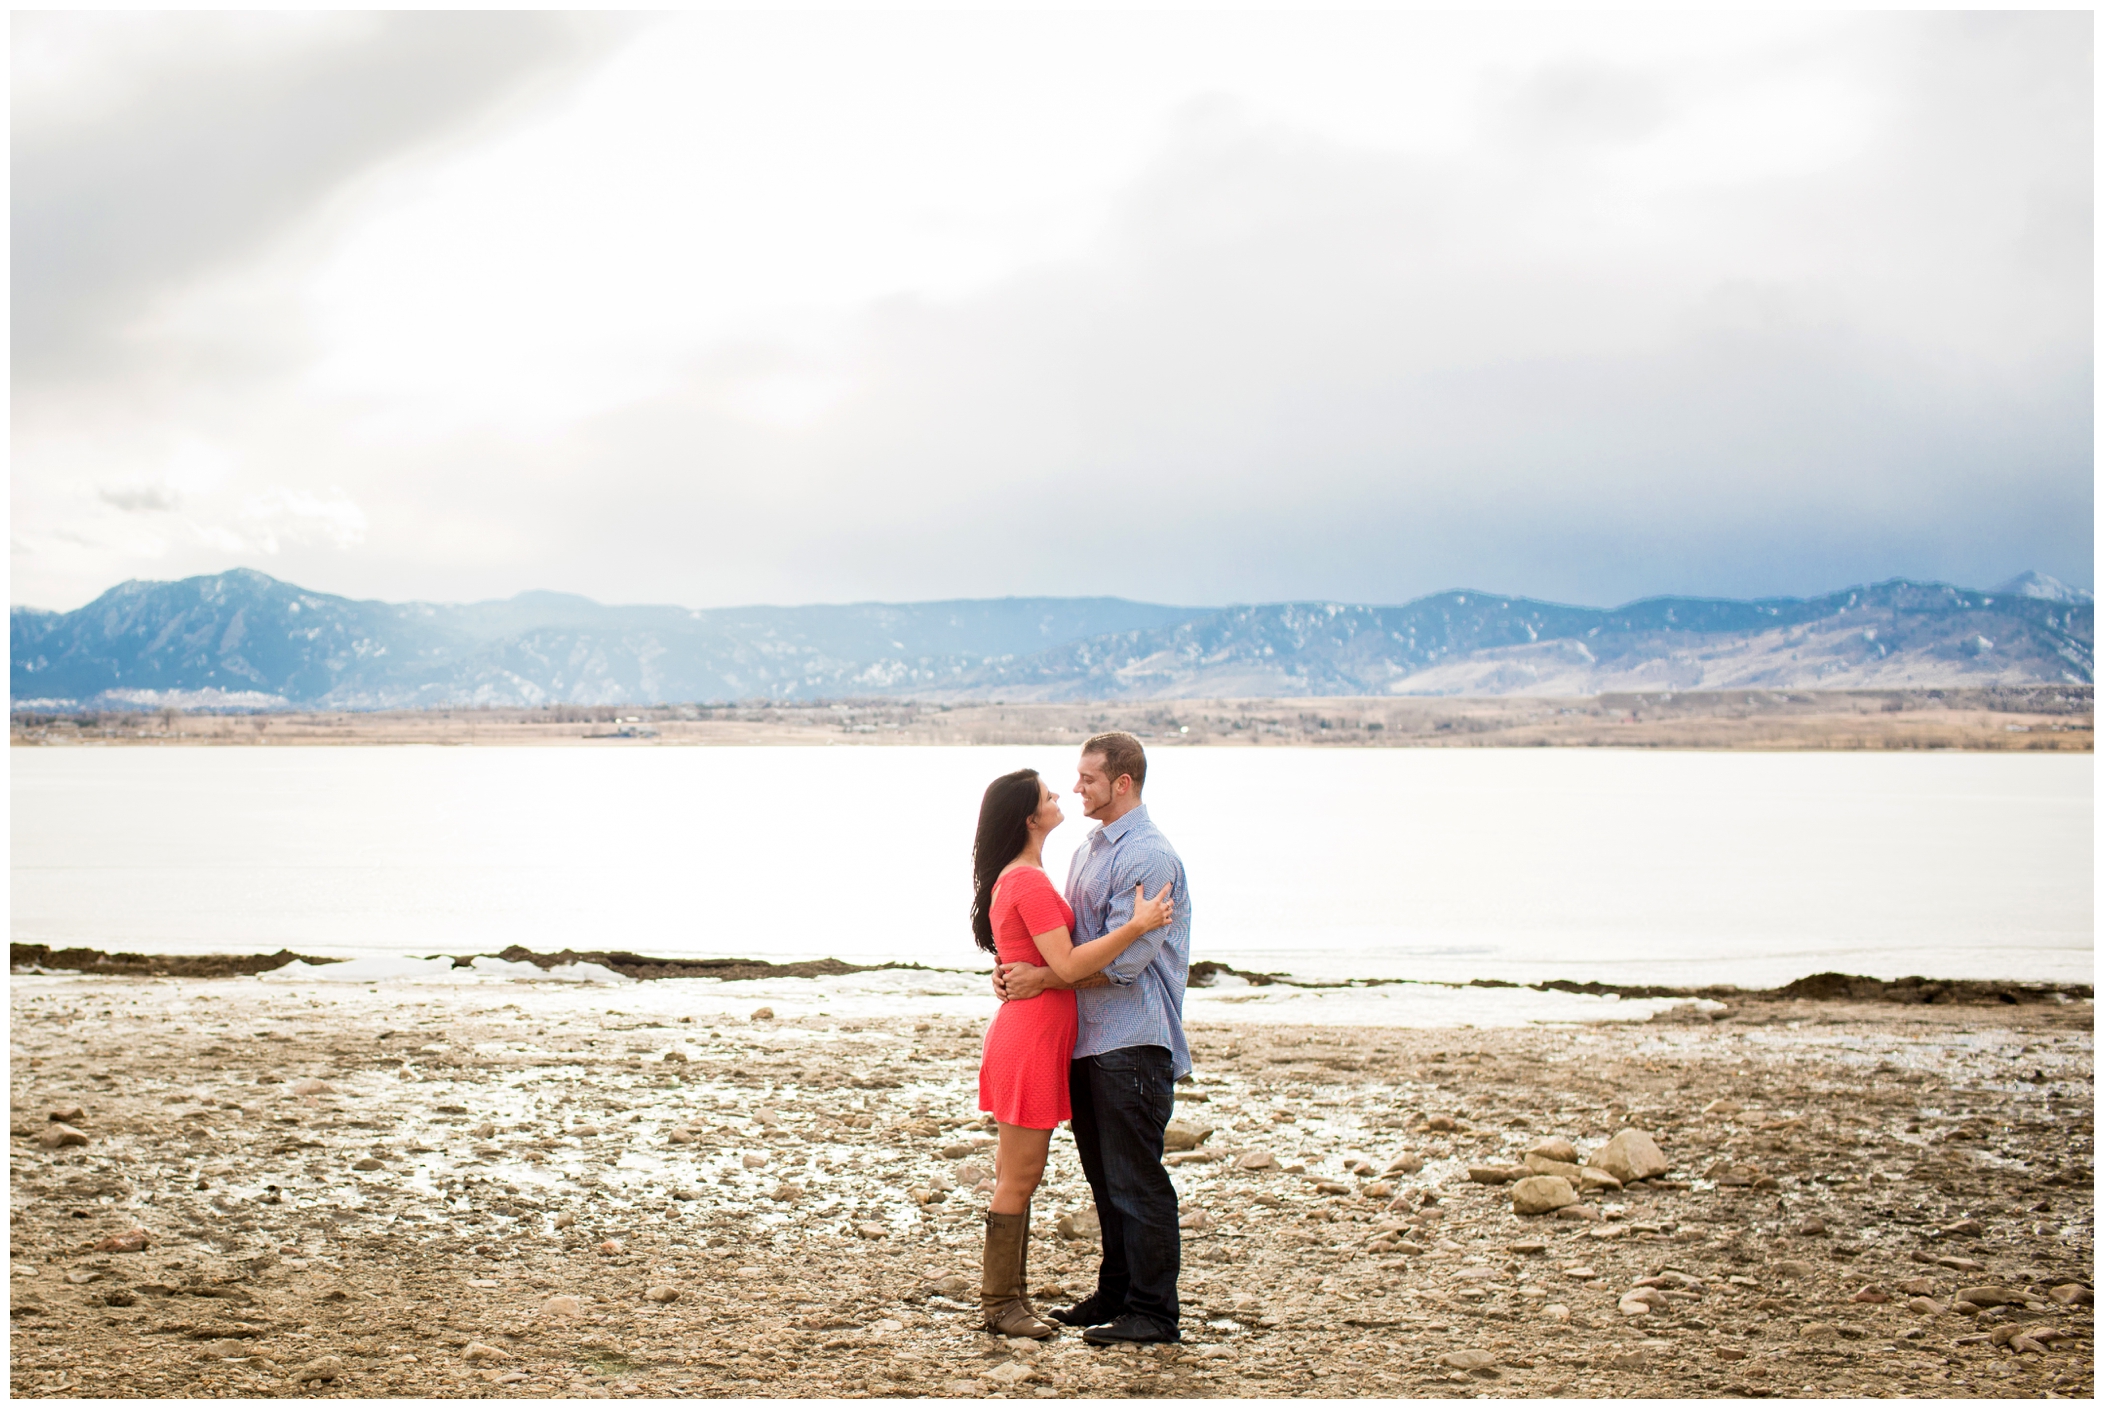 Engagement photos Boulder at Coot Lake by Plum Pretty Photography.